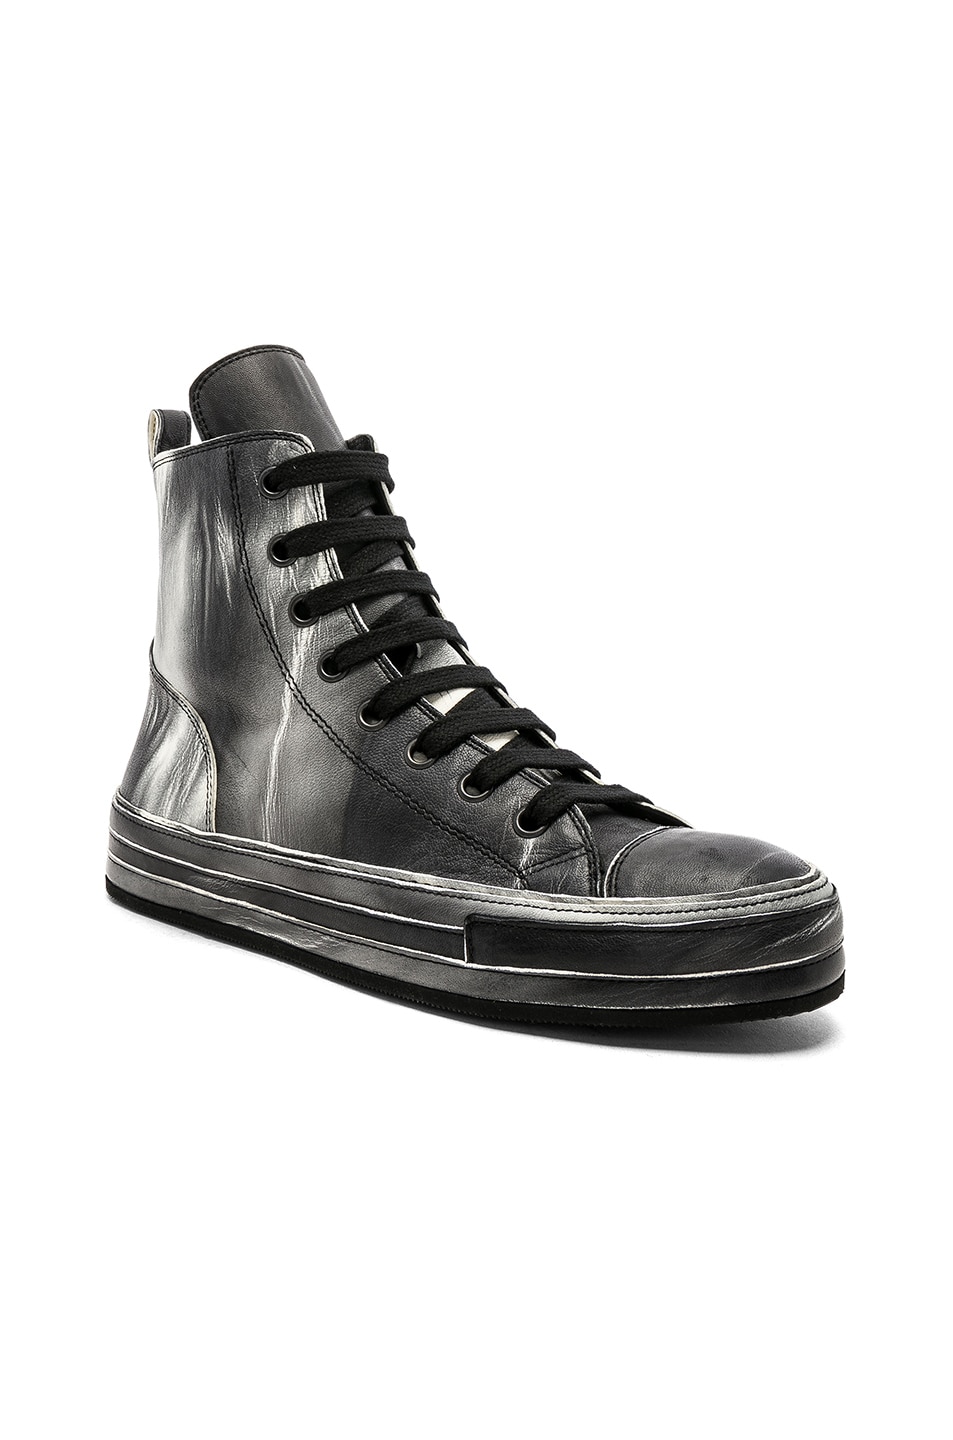 Image 1 of Ann Demeulemeester Leather Hi-Top Sneakers in Off White & Black